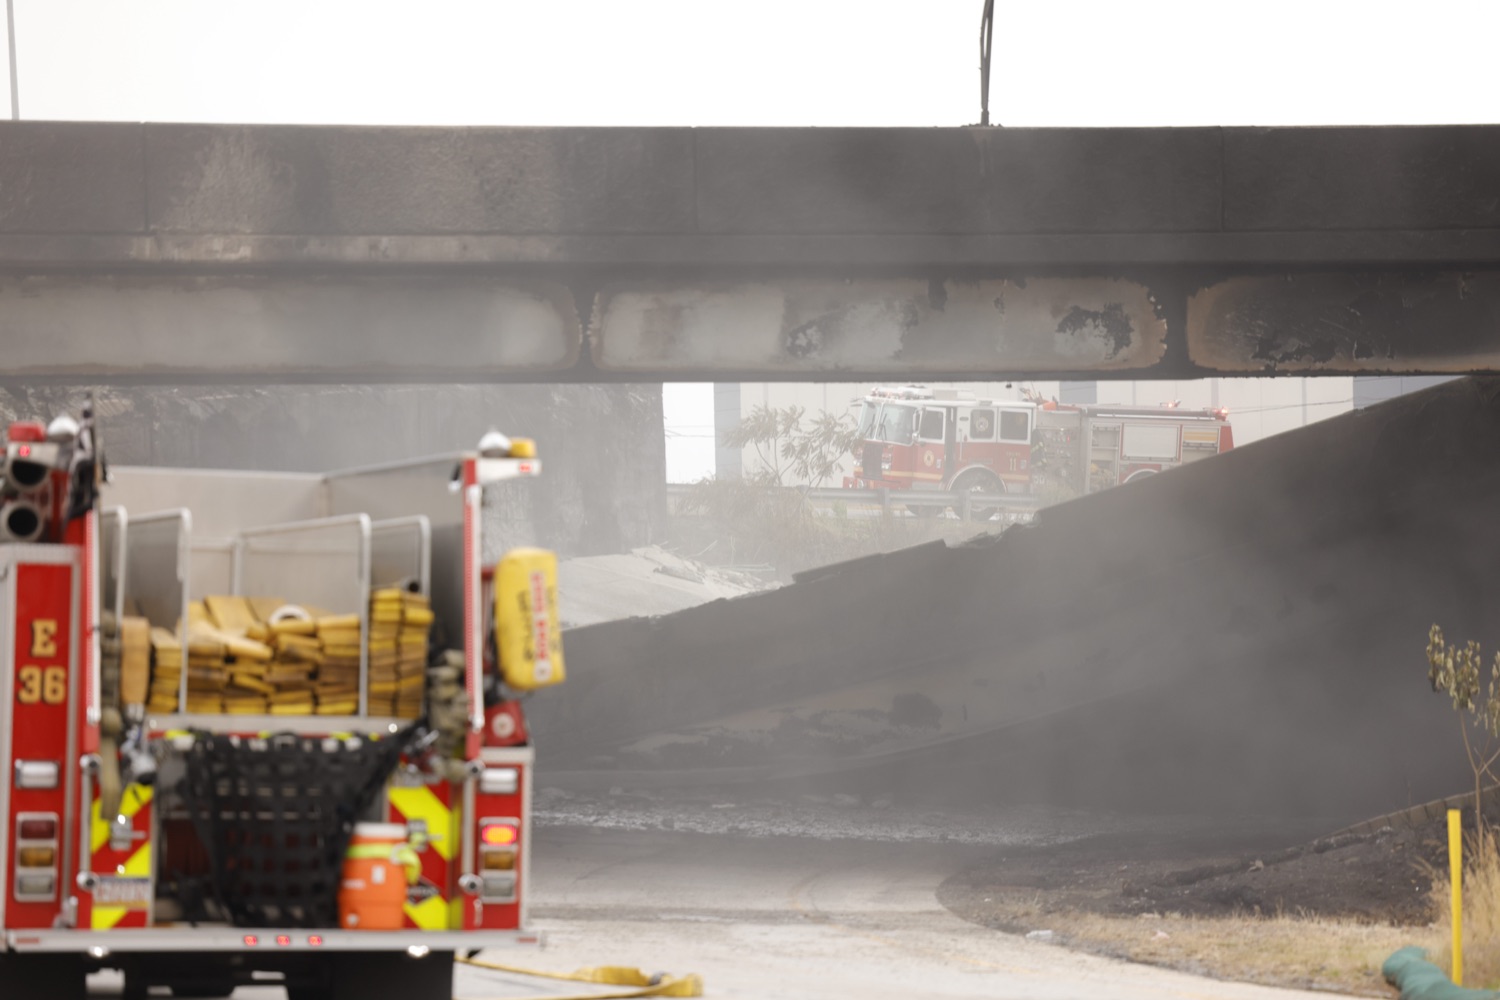 The site of the I-95 Collapse.  Governor Josh Shapiro, along with officials from the Shapiro Administration, the City of Philadelphia, and SEPTA provided an update on the response to the vehicle fire on the Route 73/Cottman Avenue ramp under Interstate 95 in Philadelphia, which caused the roadway in this area to partially collapse, and heavily damaged the southbound structure. The interstate is closed in both directions..."Interstate 95 is a critical artery that supports our economy and plays an important role in Pennsylvanians' day to day lives. My Administration is all hands on deck to repair this safely and as efficiently as possible," said Governor Shapiro. "We will rebuild and recover - and in the meantime, we will make sure people can get to where they need to go safely."..This morning, according to first responders in Philadelphia and the Pennsylvania State Police, at approximately 6:20am, a vehicle fire under I-95 near the Cottman Avenue exit in Northeast Philadelphia caused a portion of the highway to collapse. Preliminary reports indicate a commercial truck carrying a petroleum-based product was the source of the fire. Since the crash occurred, PEMA has also been on-site, coordinating response efforts with local and federal partners.  JUNE 11, 2023 - PHILADELPHIA, PA.<br><a href="https://filesource.amperwave.net/commonwealthofpa/photo/23248_gov_I95Collapse_dz_018.JPG" target="_blank">⇣ Download Photo</a>